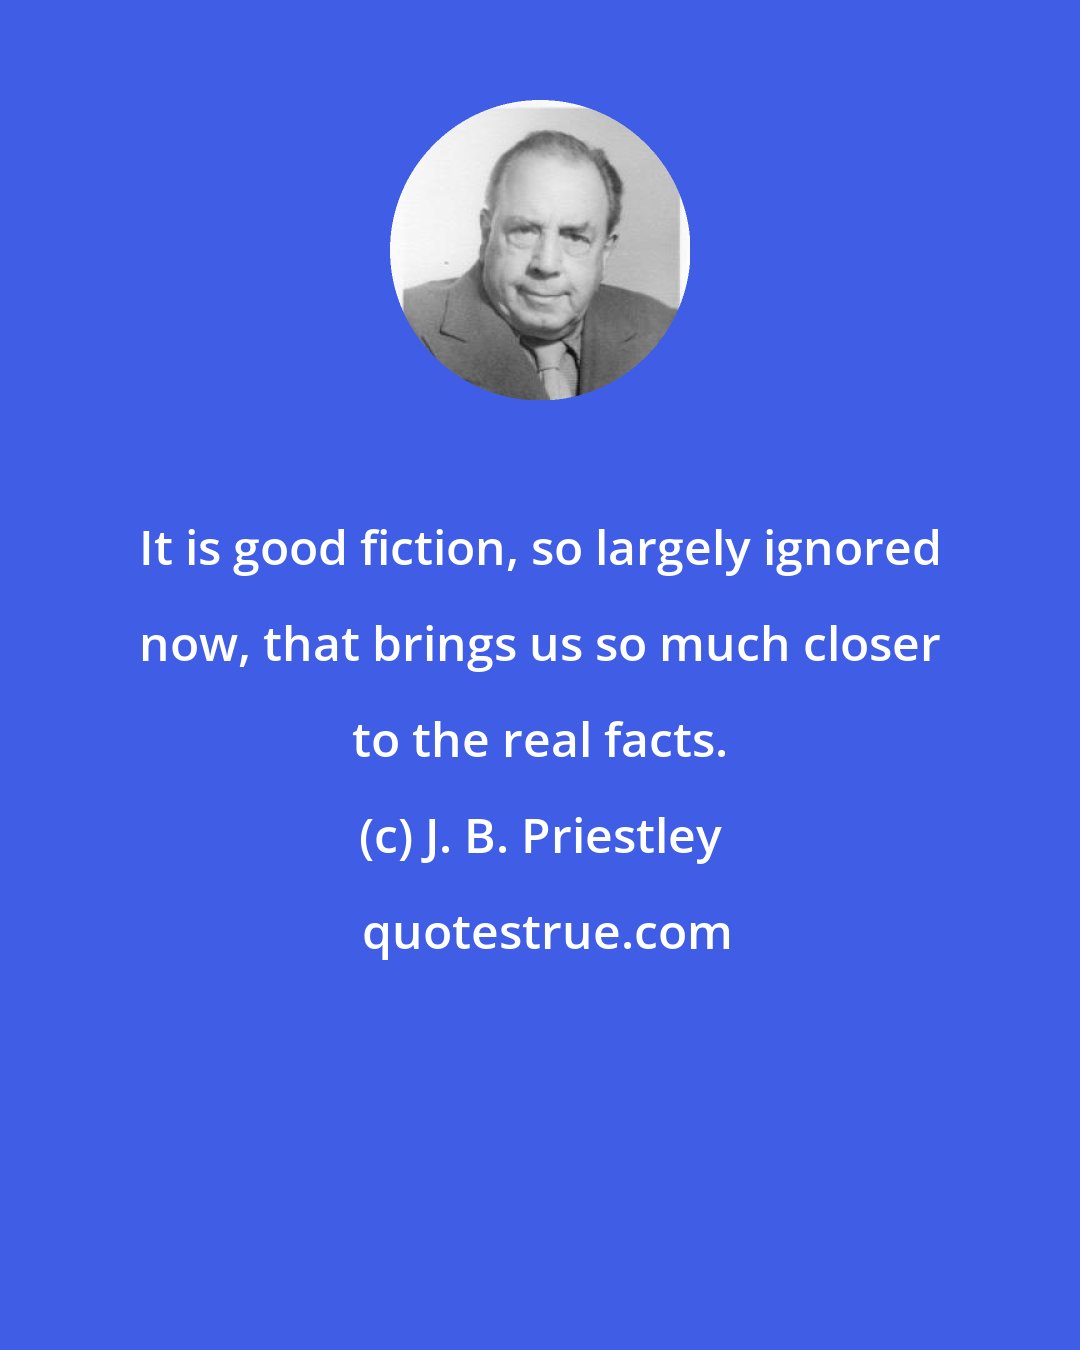 J. B. Priestley: It is good fiction, so largely ignored now, that brings us so much closer to the real facts.